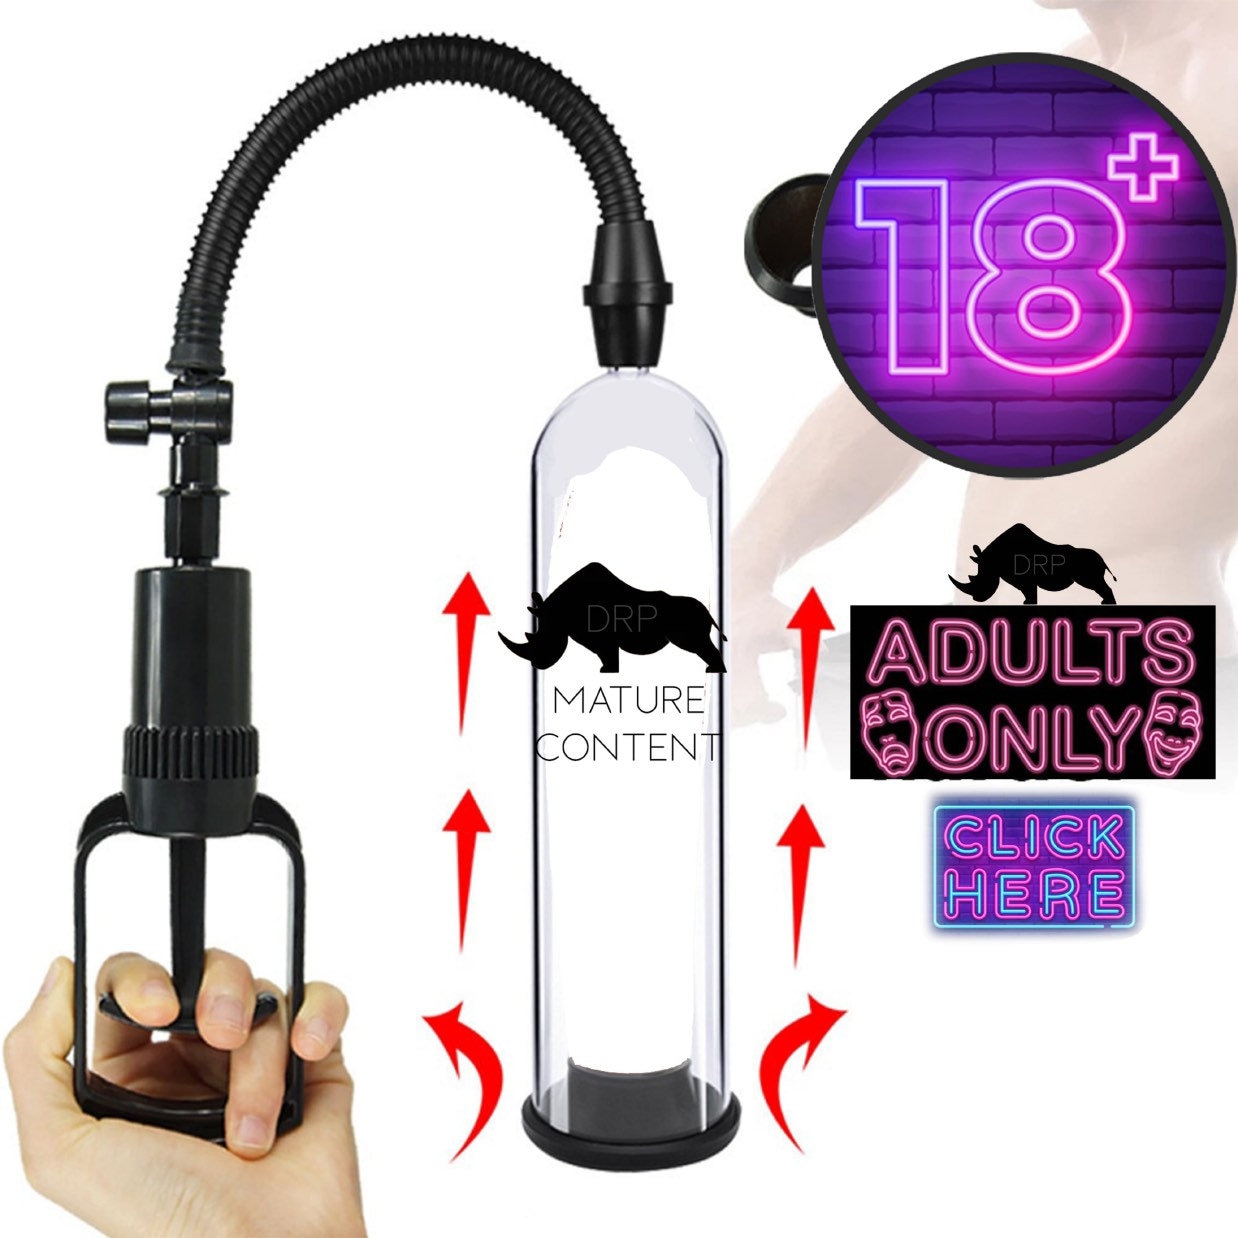 Mature Male Pump for Bigger Grow Your Penis Lenght Manual picture image photo